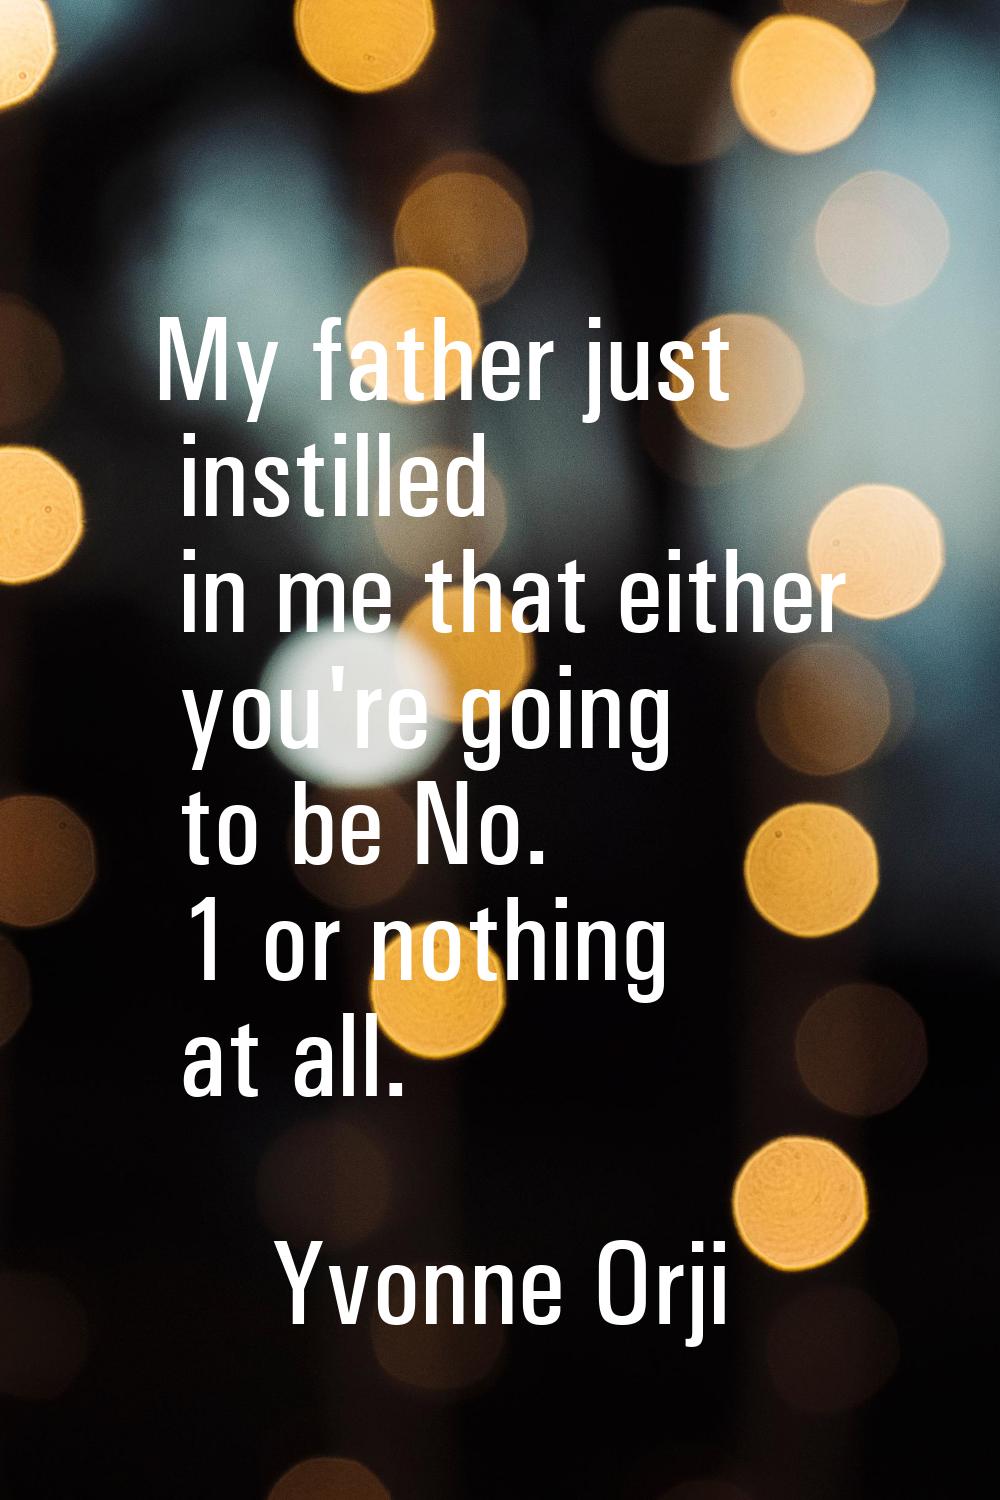 My father just instilled in me that either you're going to be No. 1 or nothing at all.